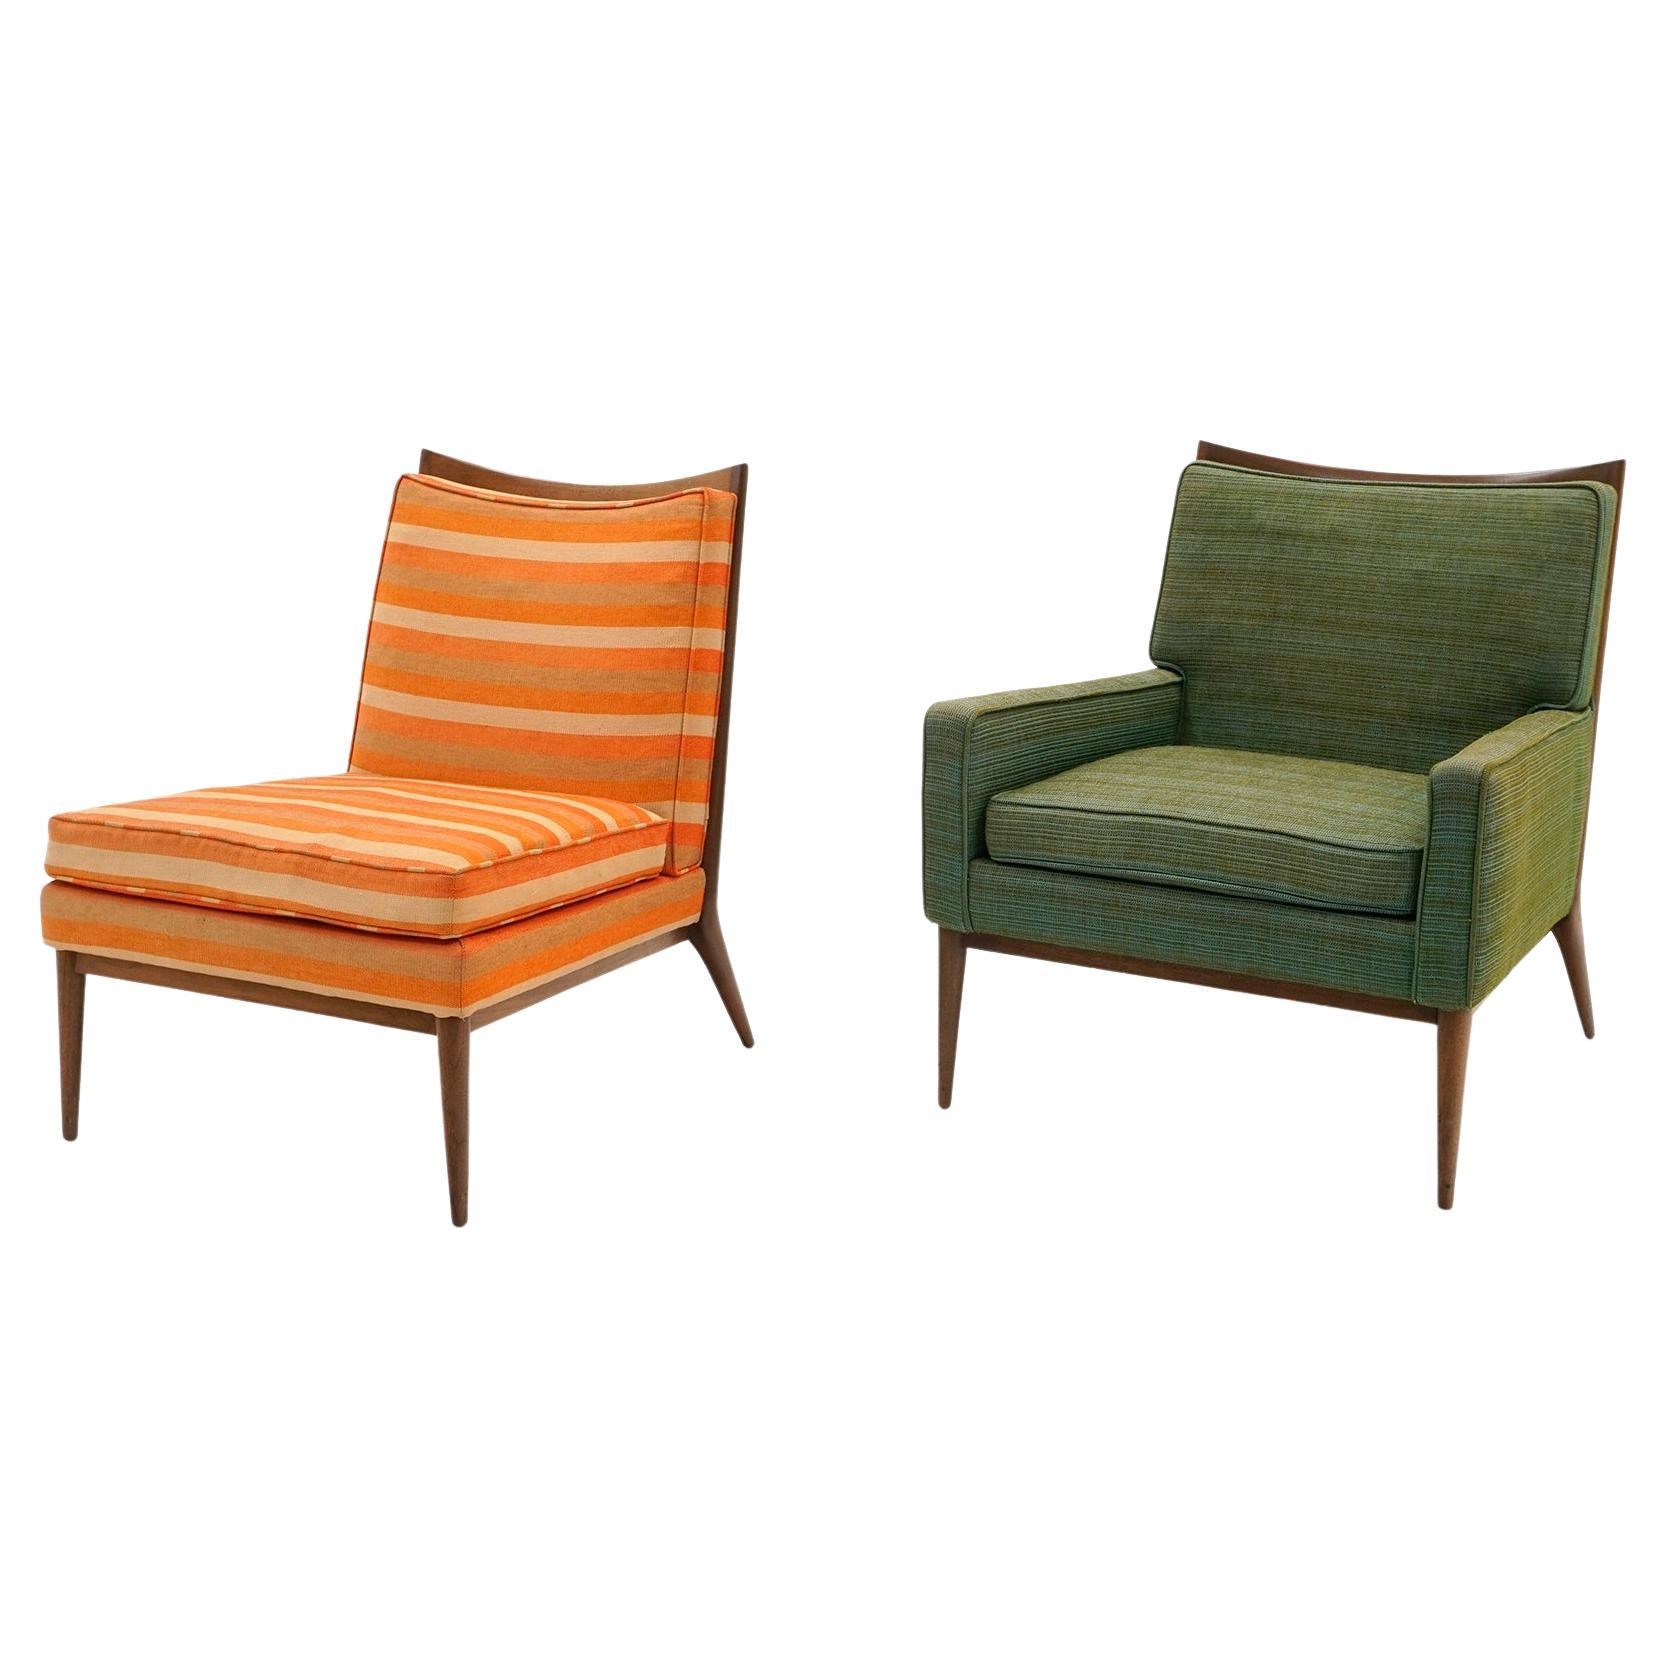 Paul McCobb Lounge Chairs Models 1320 & 1322.  Priced for Reupholstery. Signed.